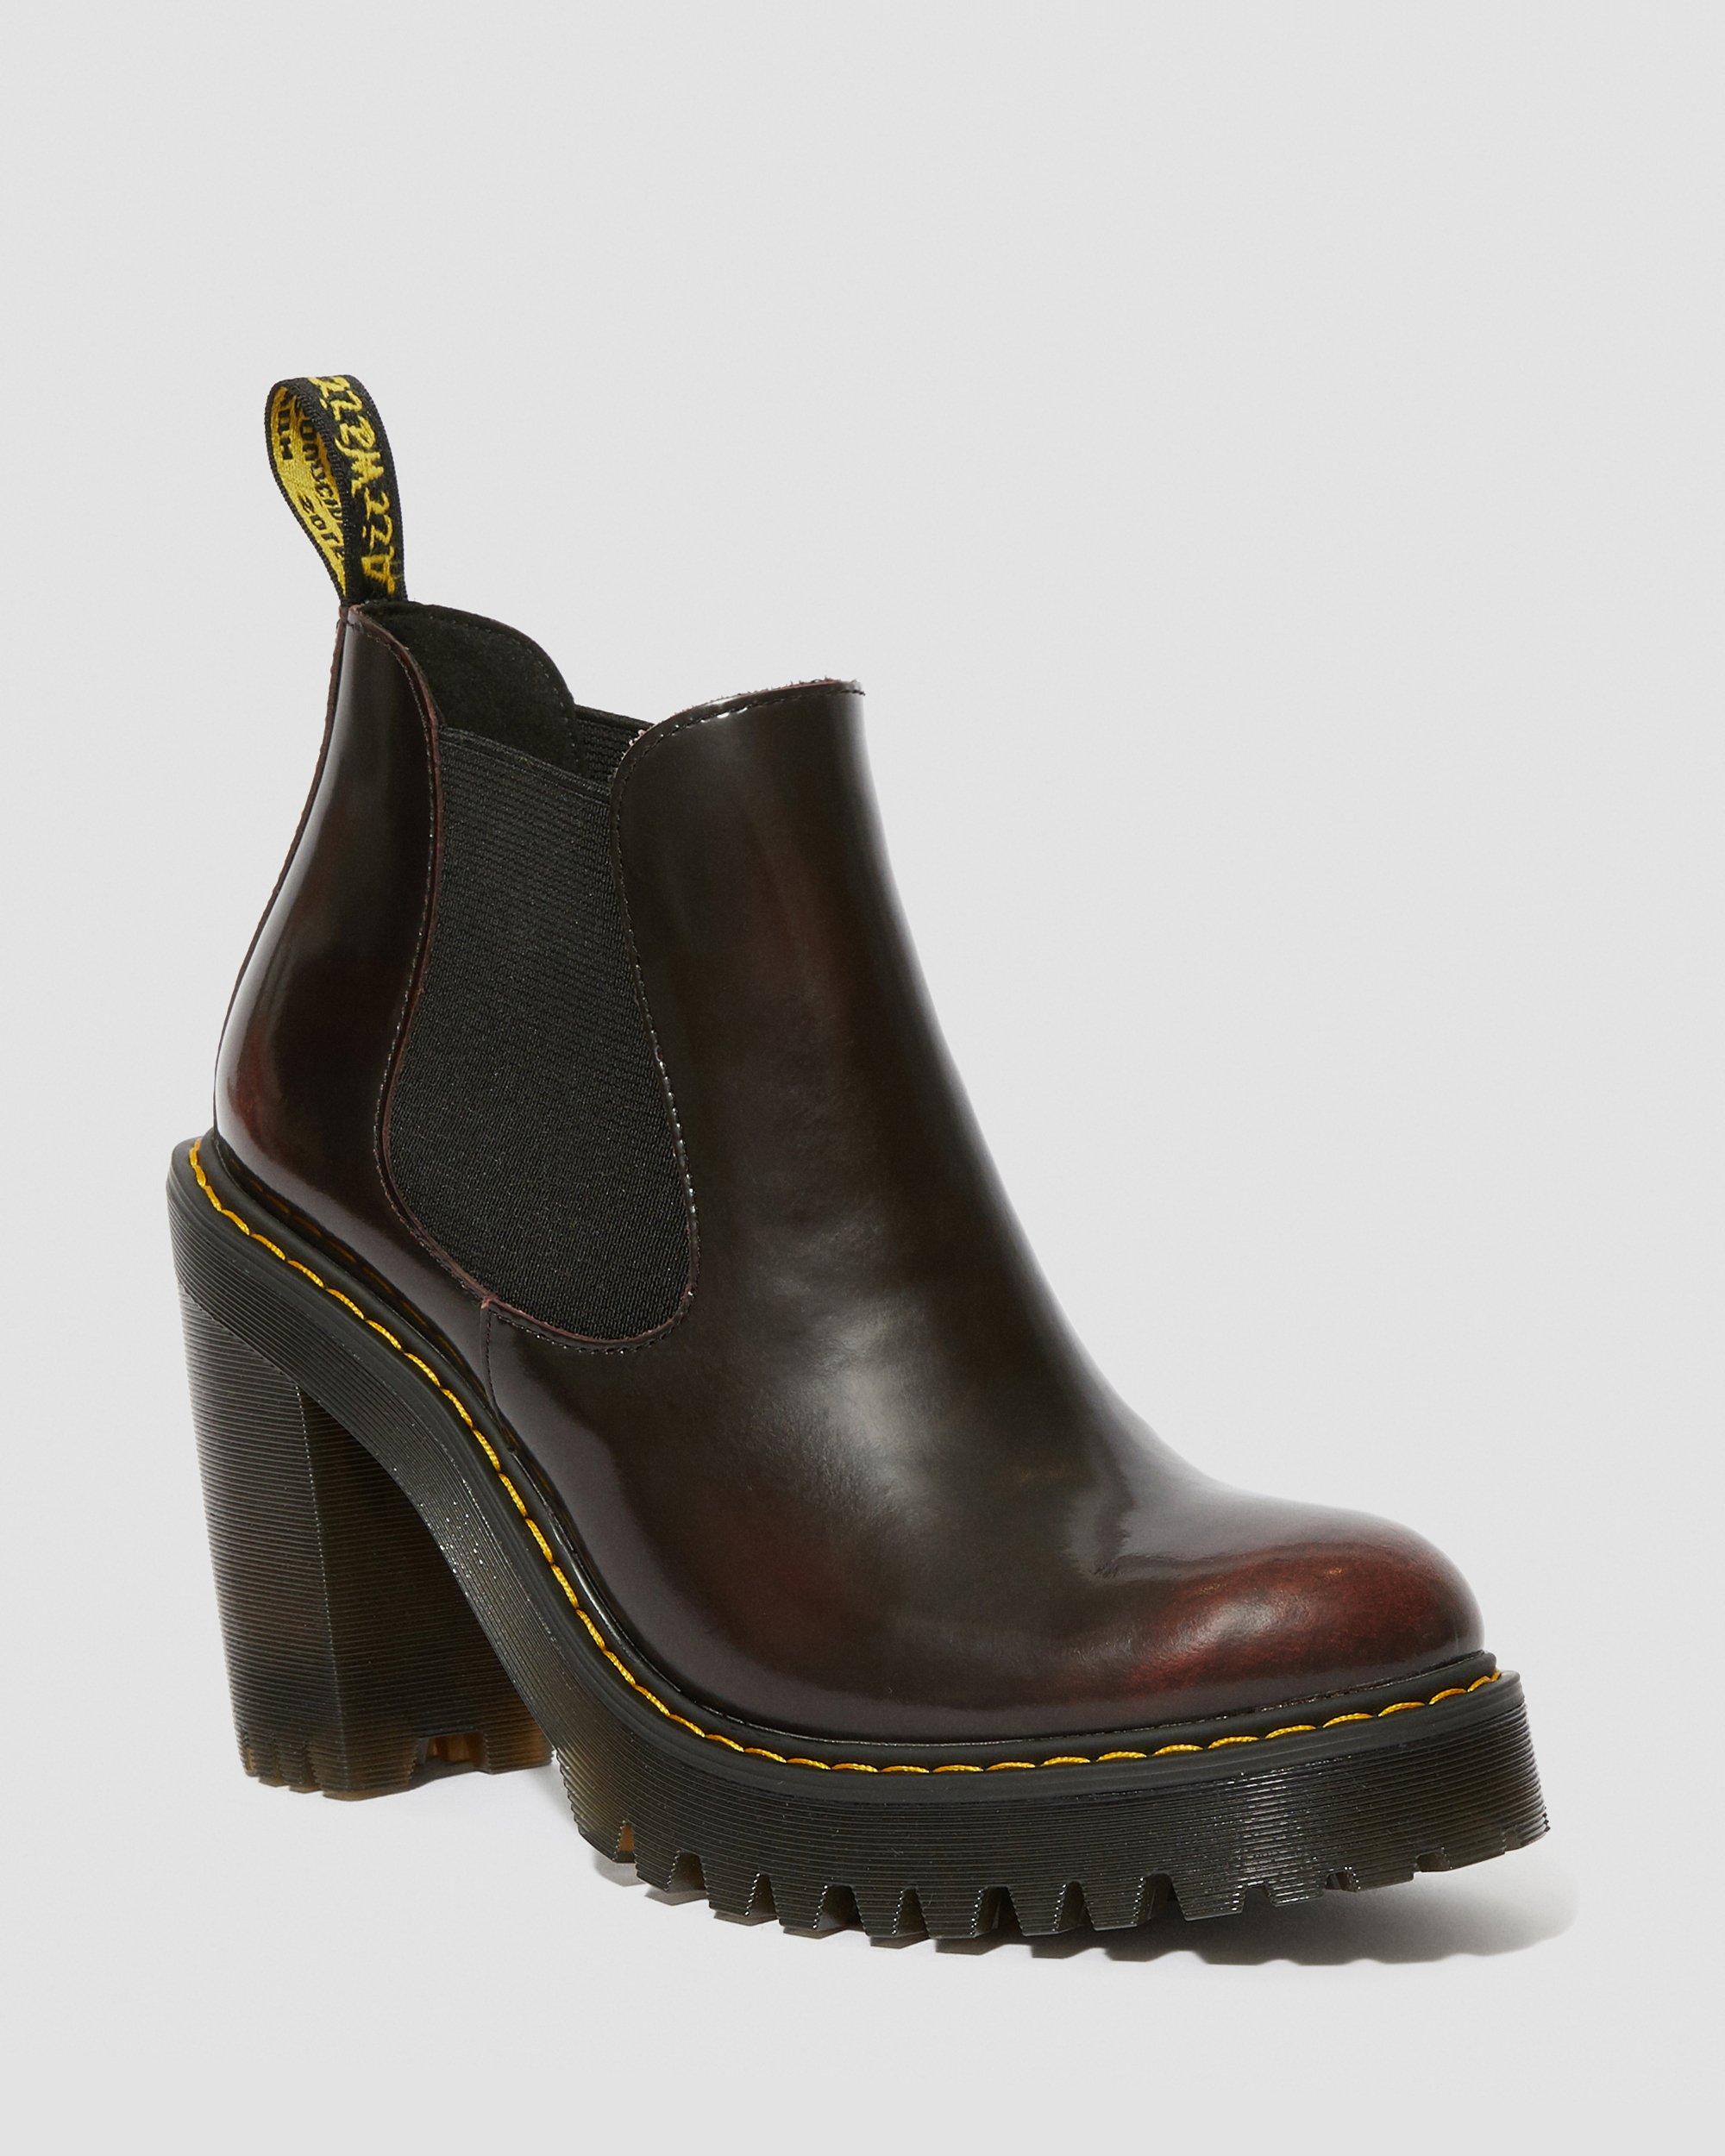 Hurston Women's Arcadia Leather Heeled Chelsea Boots Dr. Martens